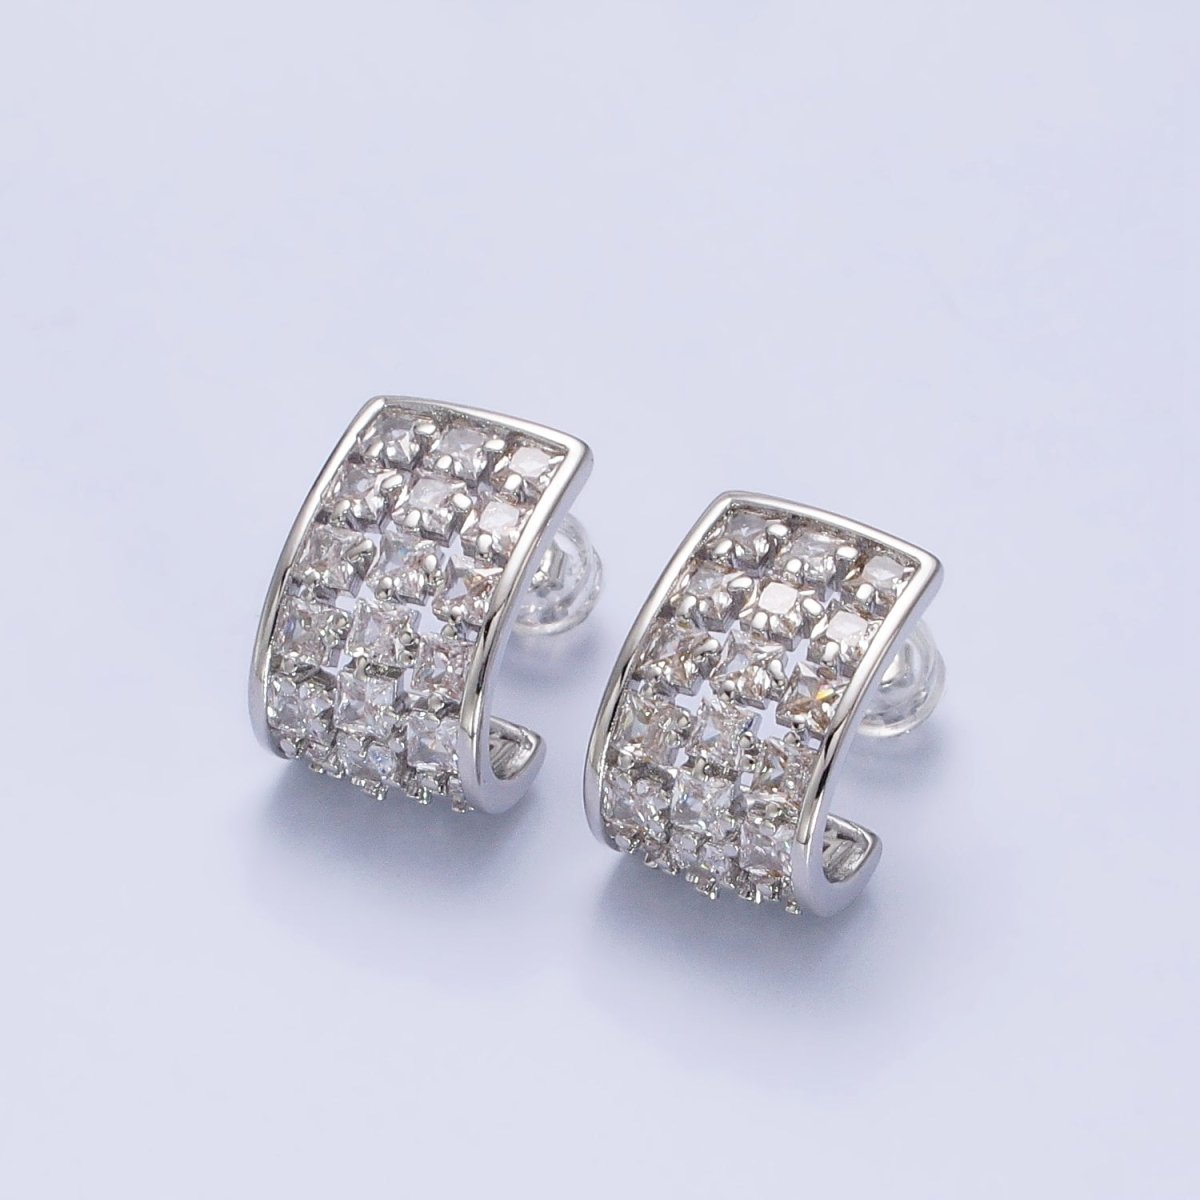 Gold, Silver Clear CZ Square Lined Wide J-Shaped Mini Hoop Earrings | AB368 AB369 - DLUXCA